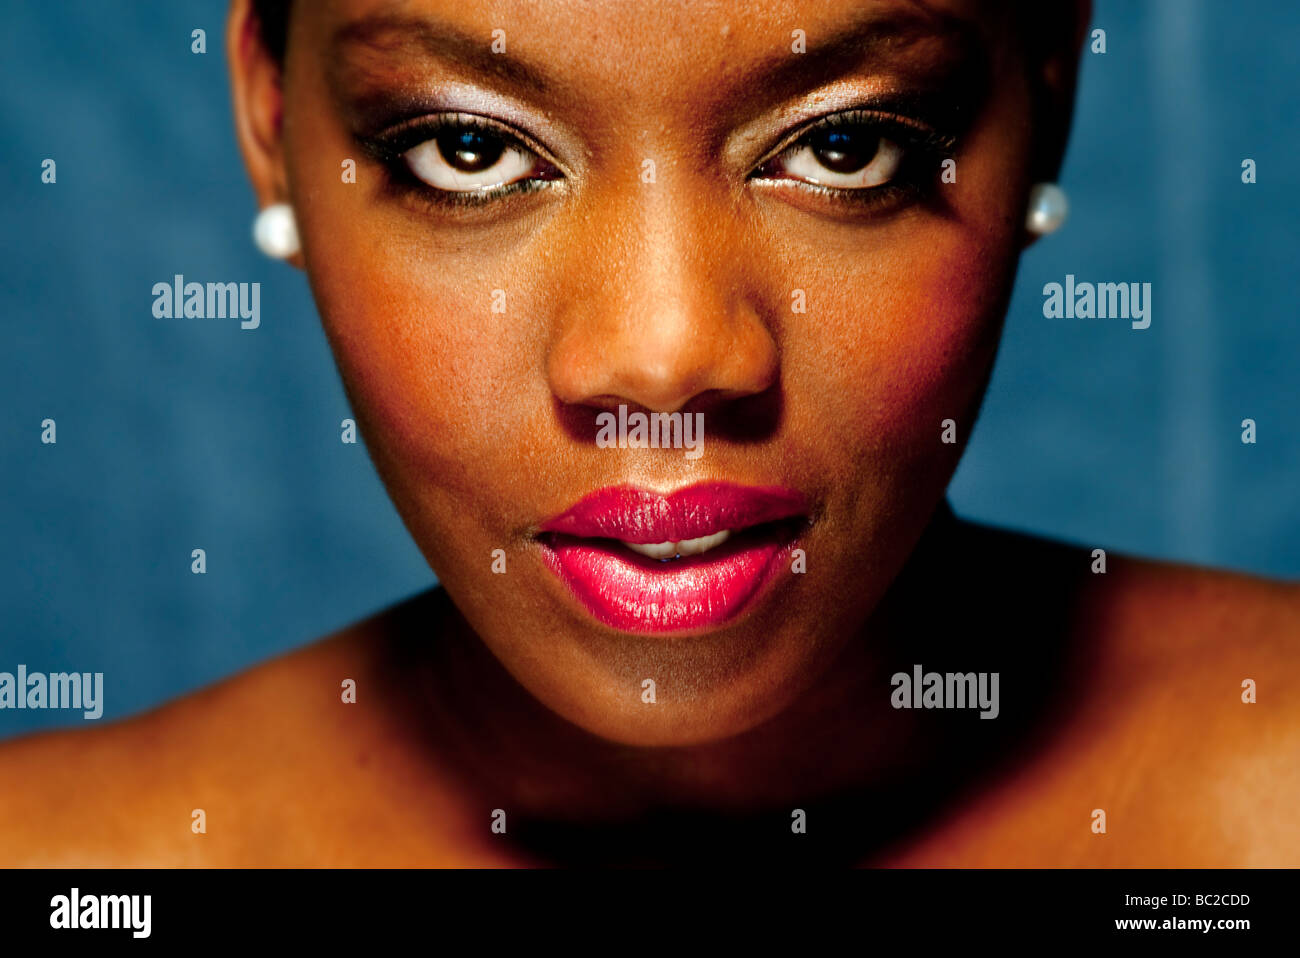 close up of a black woman wearing red lipstick Stock Photo